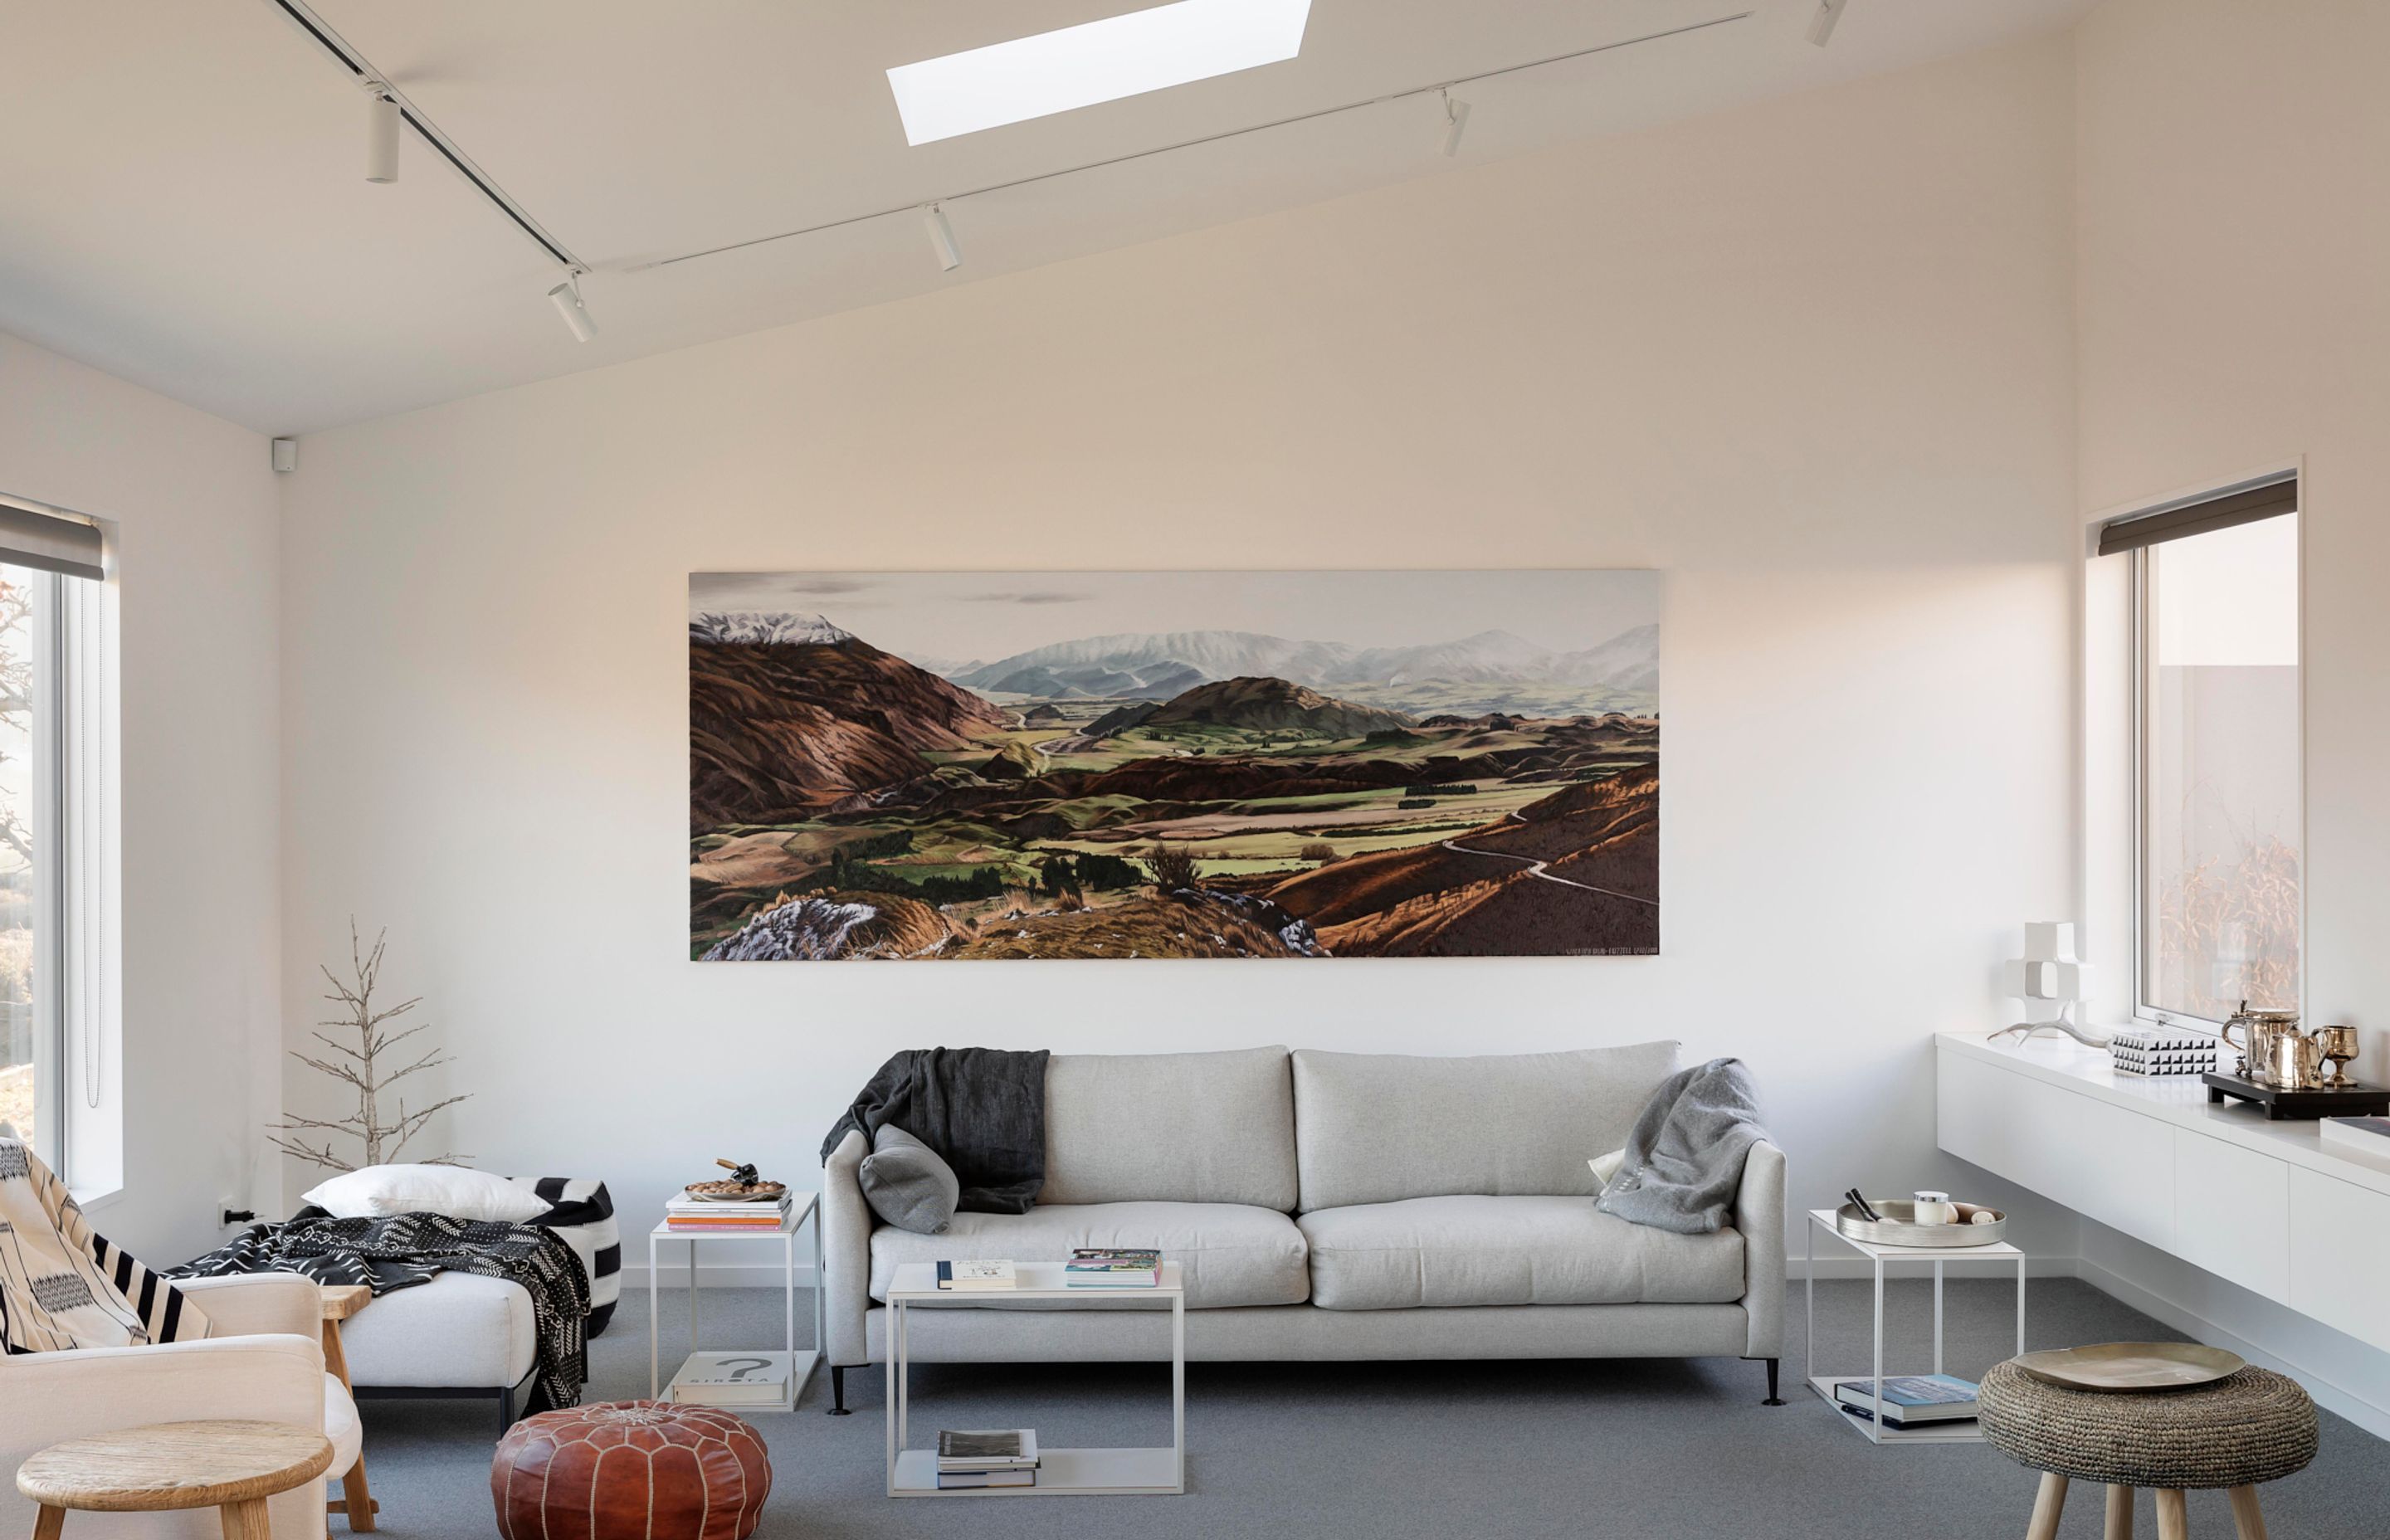 Artwork from New Zealand artists is featured prominently throughout the home.